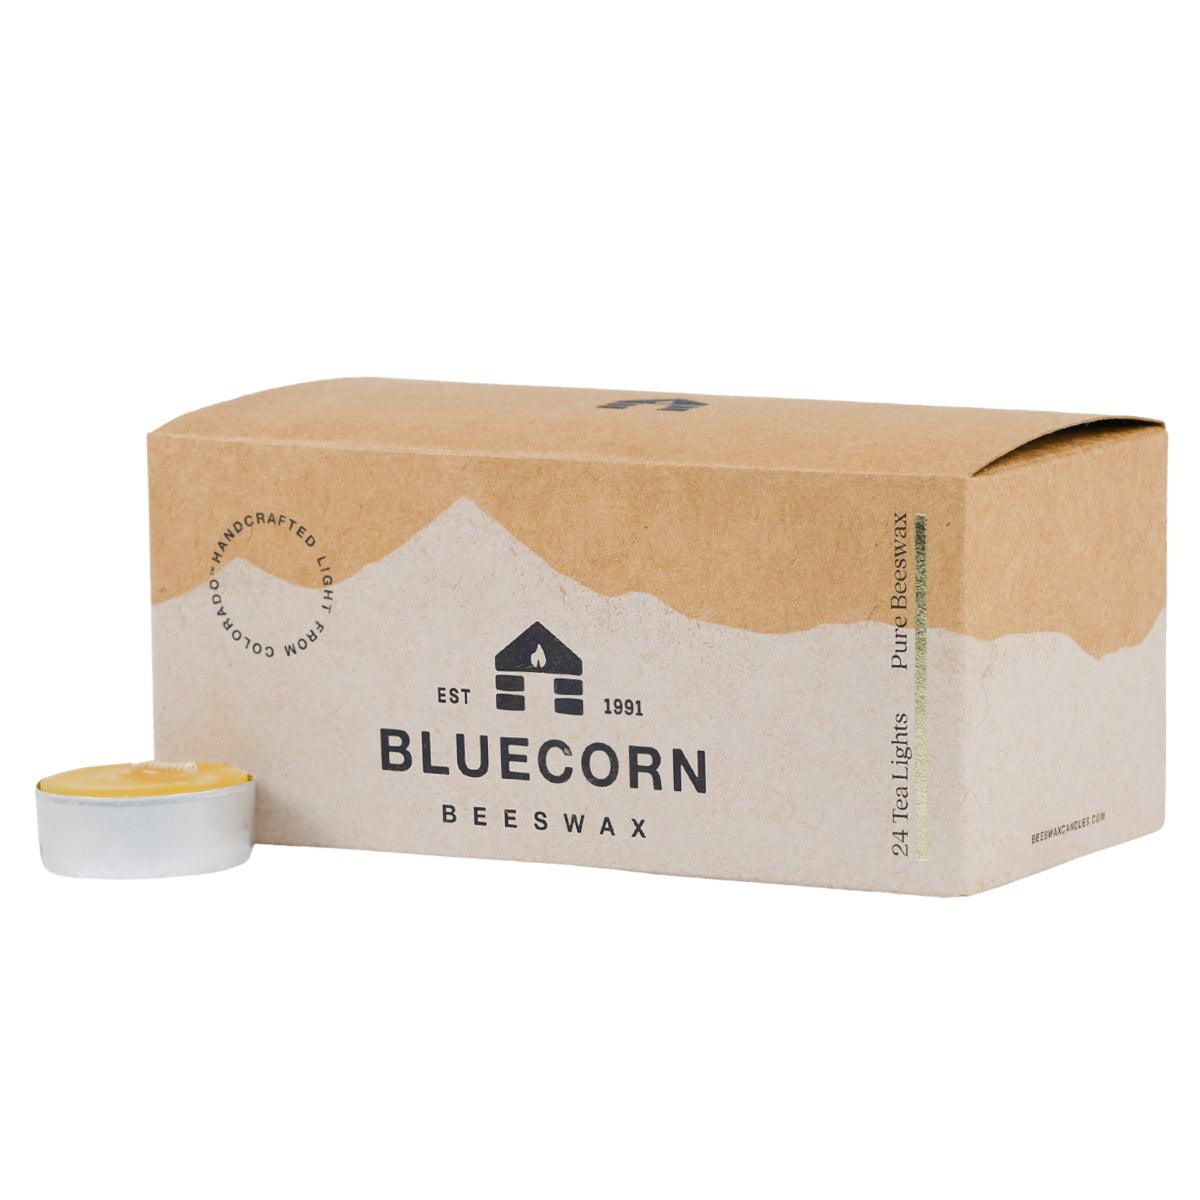 Bluecorn Beeswax 100% Pure Beeswax 24 Pack Raw Tea Light in Metal cups. Picture features one Tea Light outside of Bluecorn branded Tea Light Box with a white background. Box features Bluecorn Beeswax name and logo, with an outline of Mt. Wilson in white printed on a 100% recycled kraft paper box. Tea lights will burn for about 5 hours each.